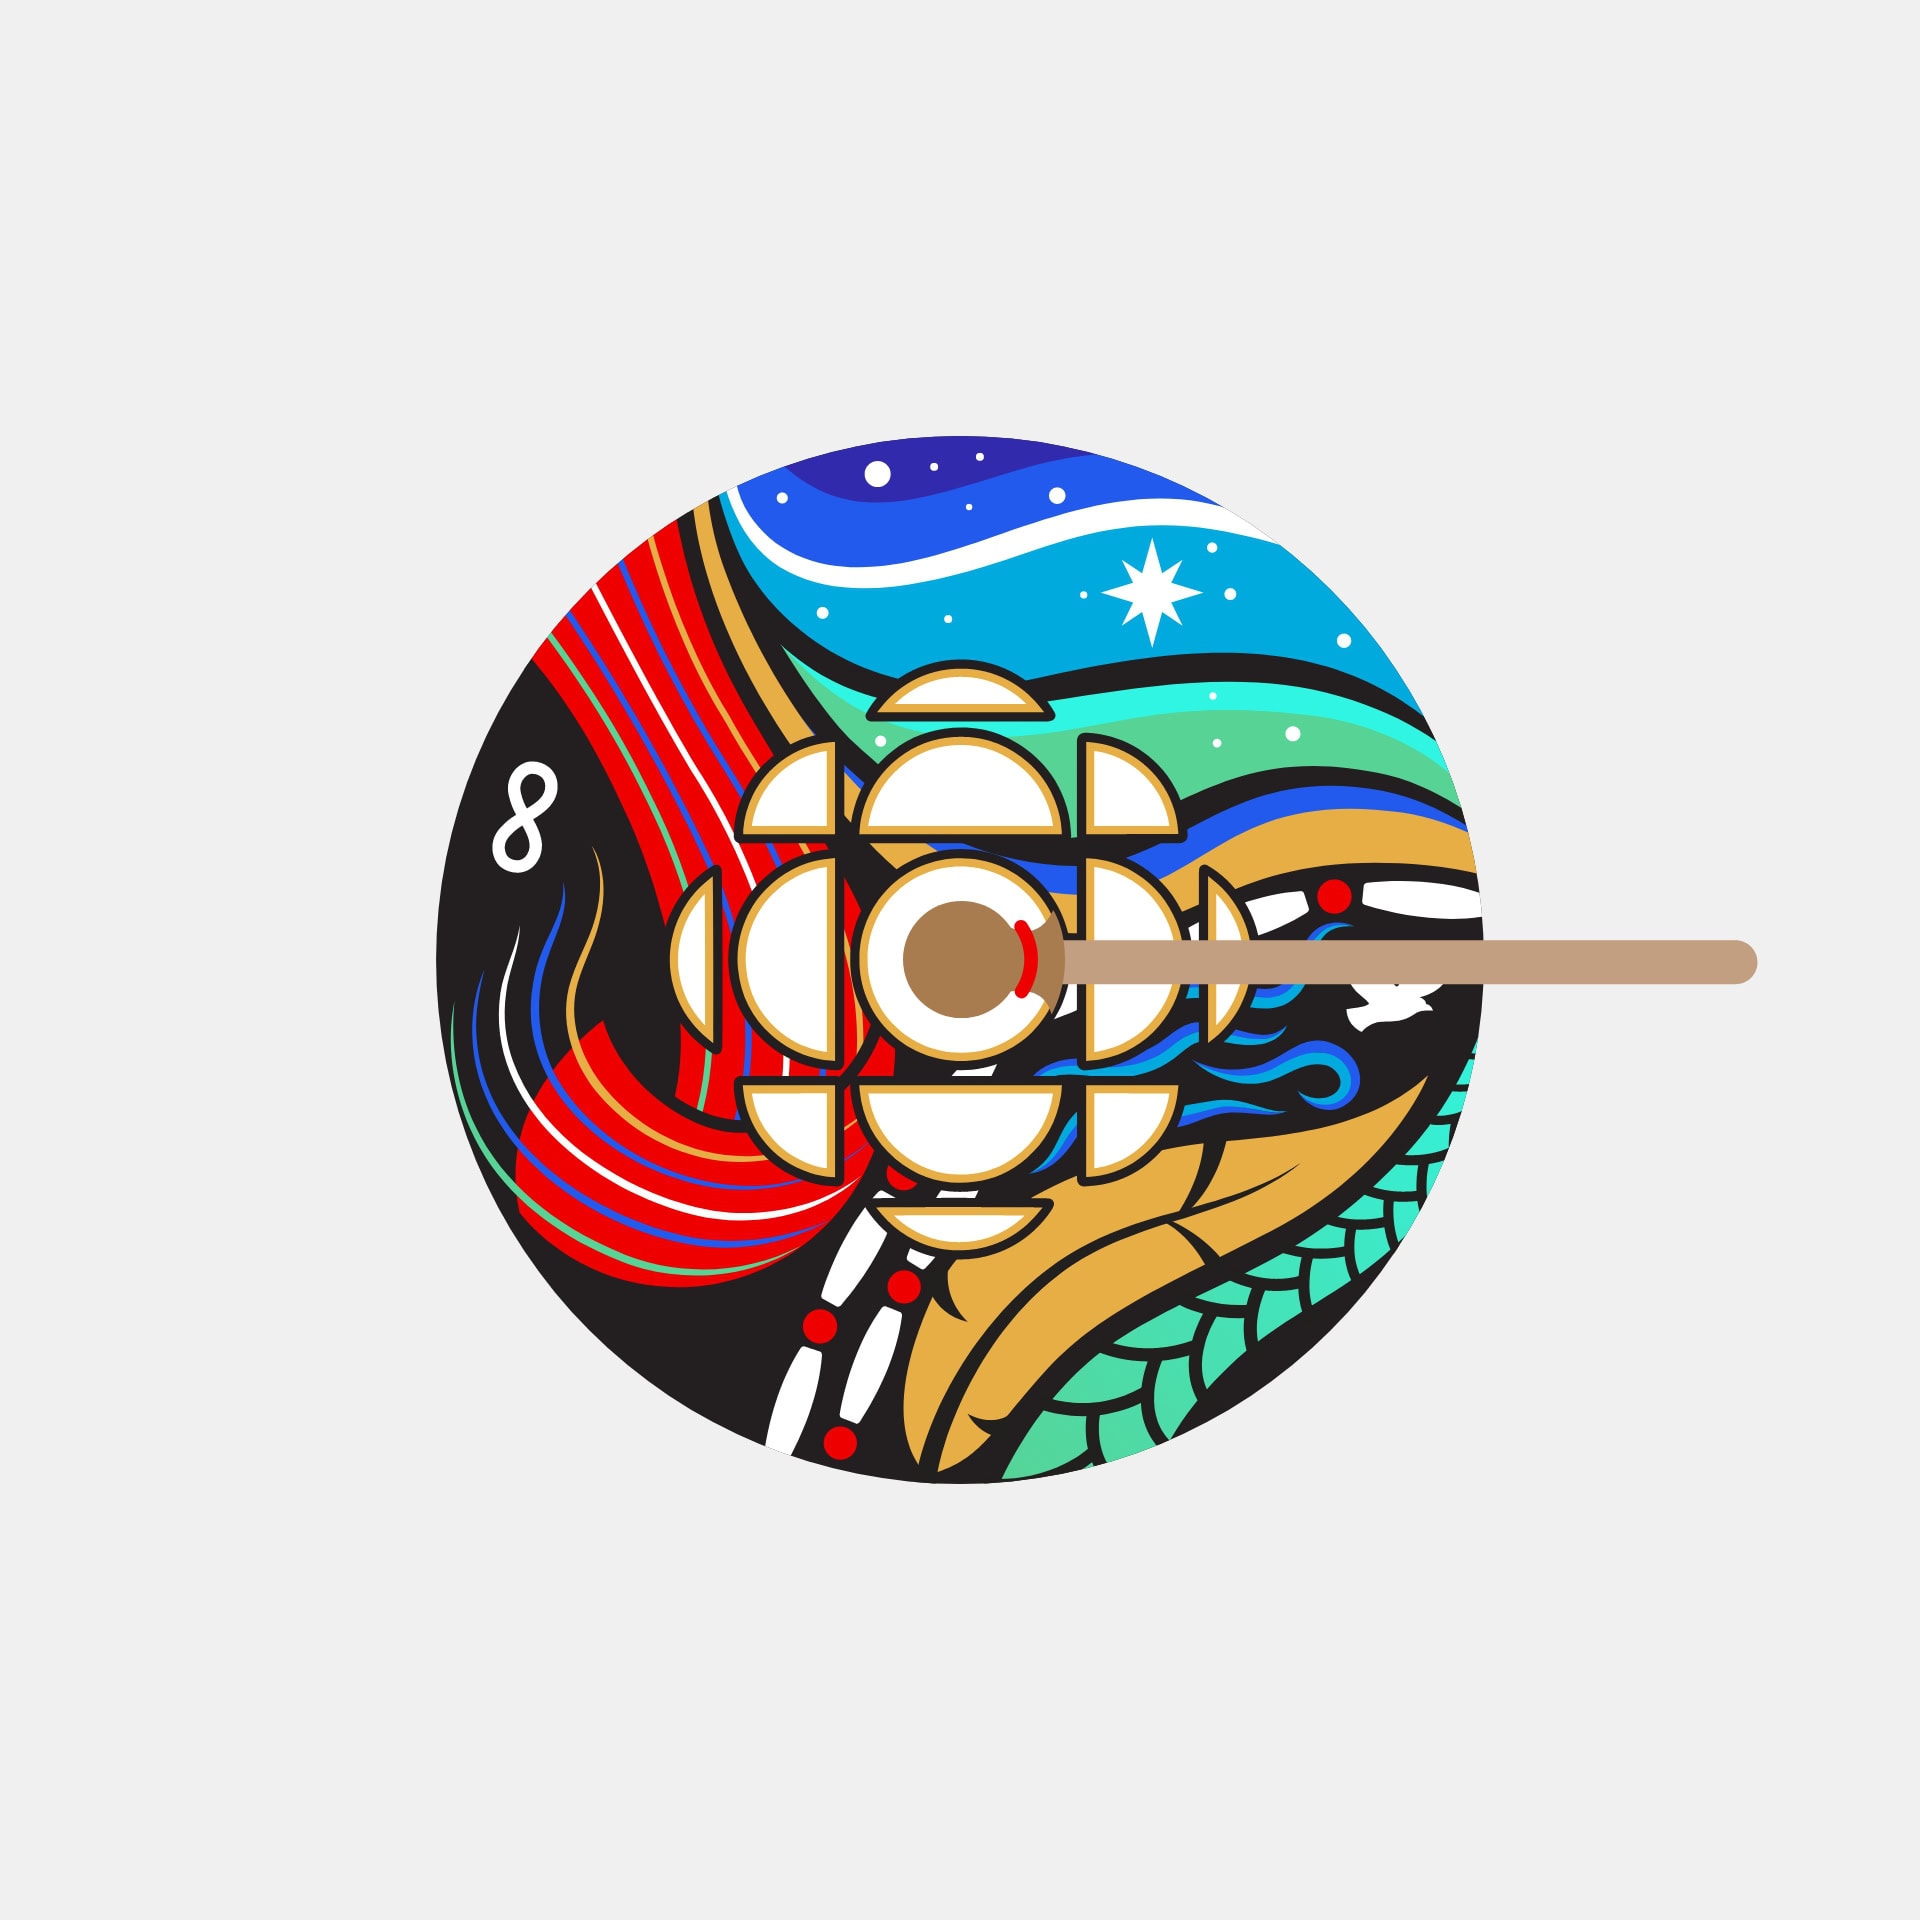 CBC's gem logo overtop an image which includes Northern lights, stars, a Metis sash and First Nation beads and medicines.